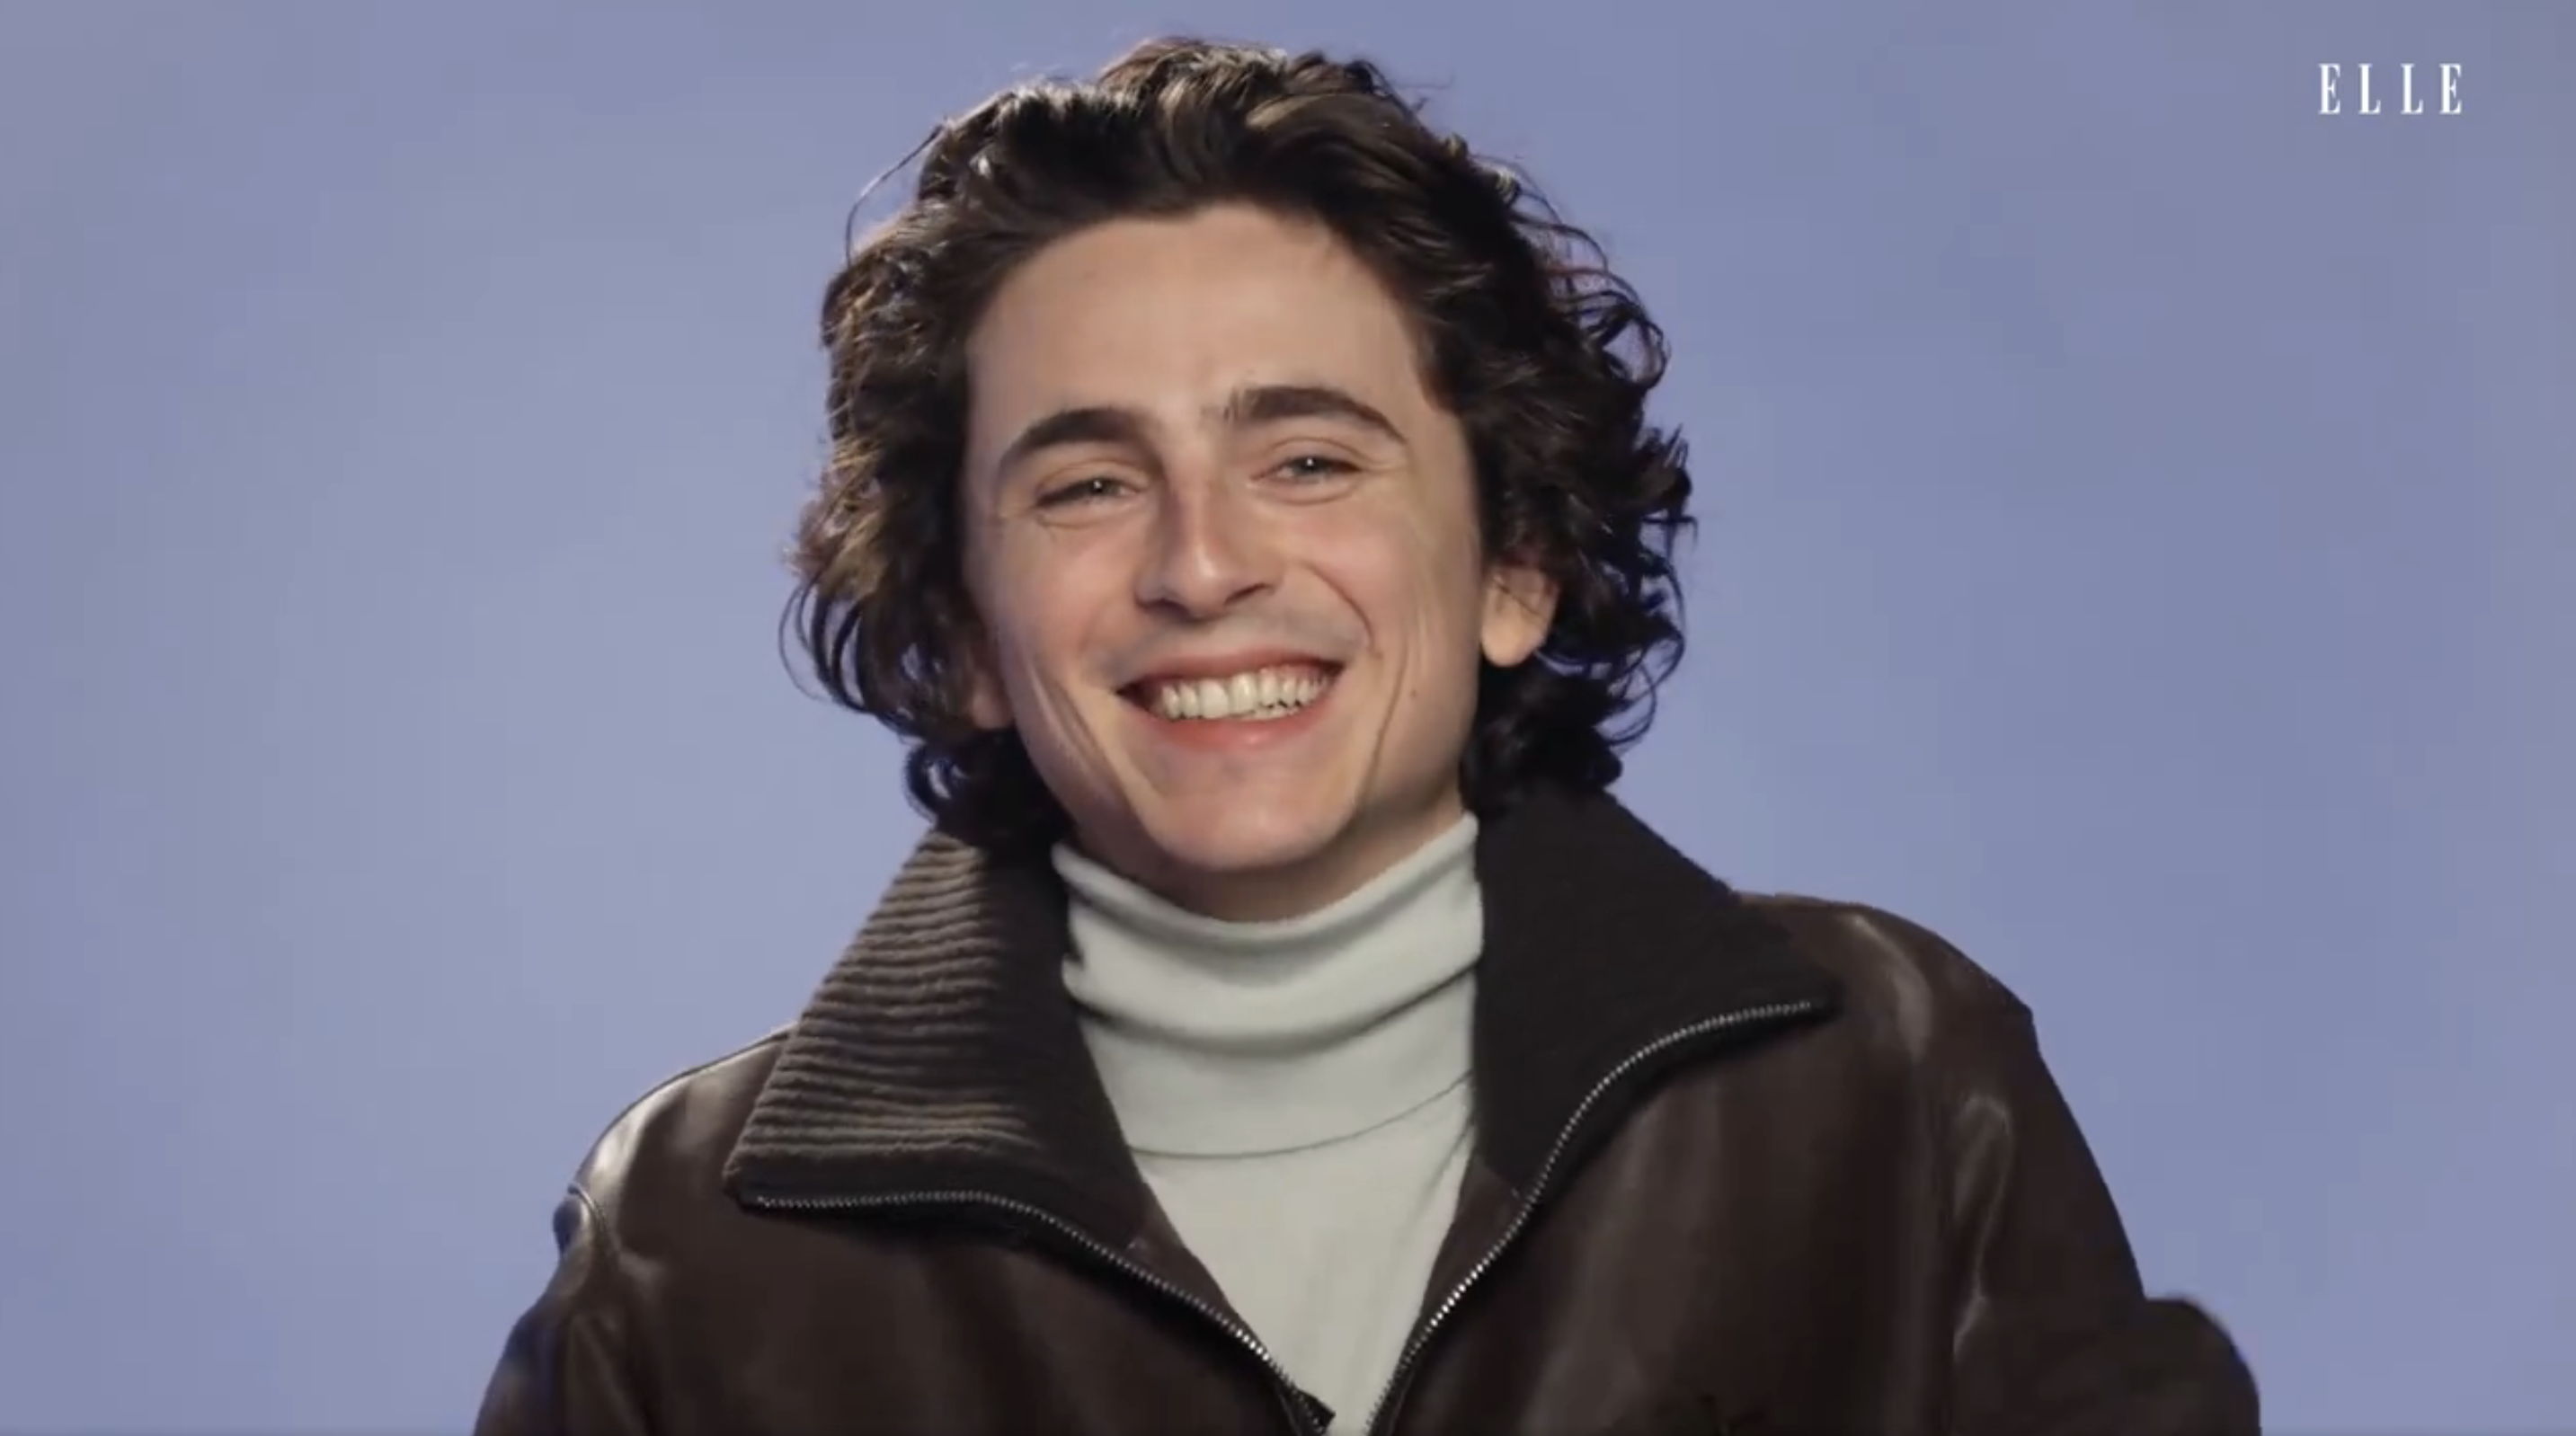 Timothée Chalamet with curly hair wearing a turtleneck and leather jacket smiles at the camera